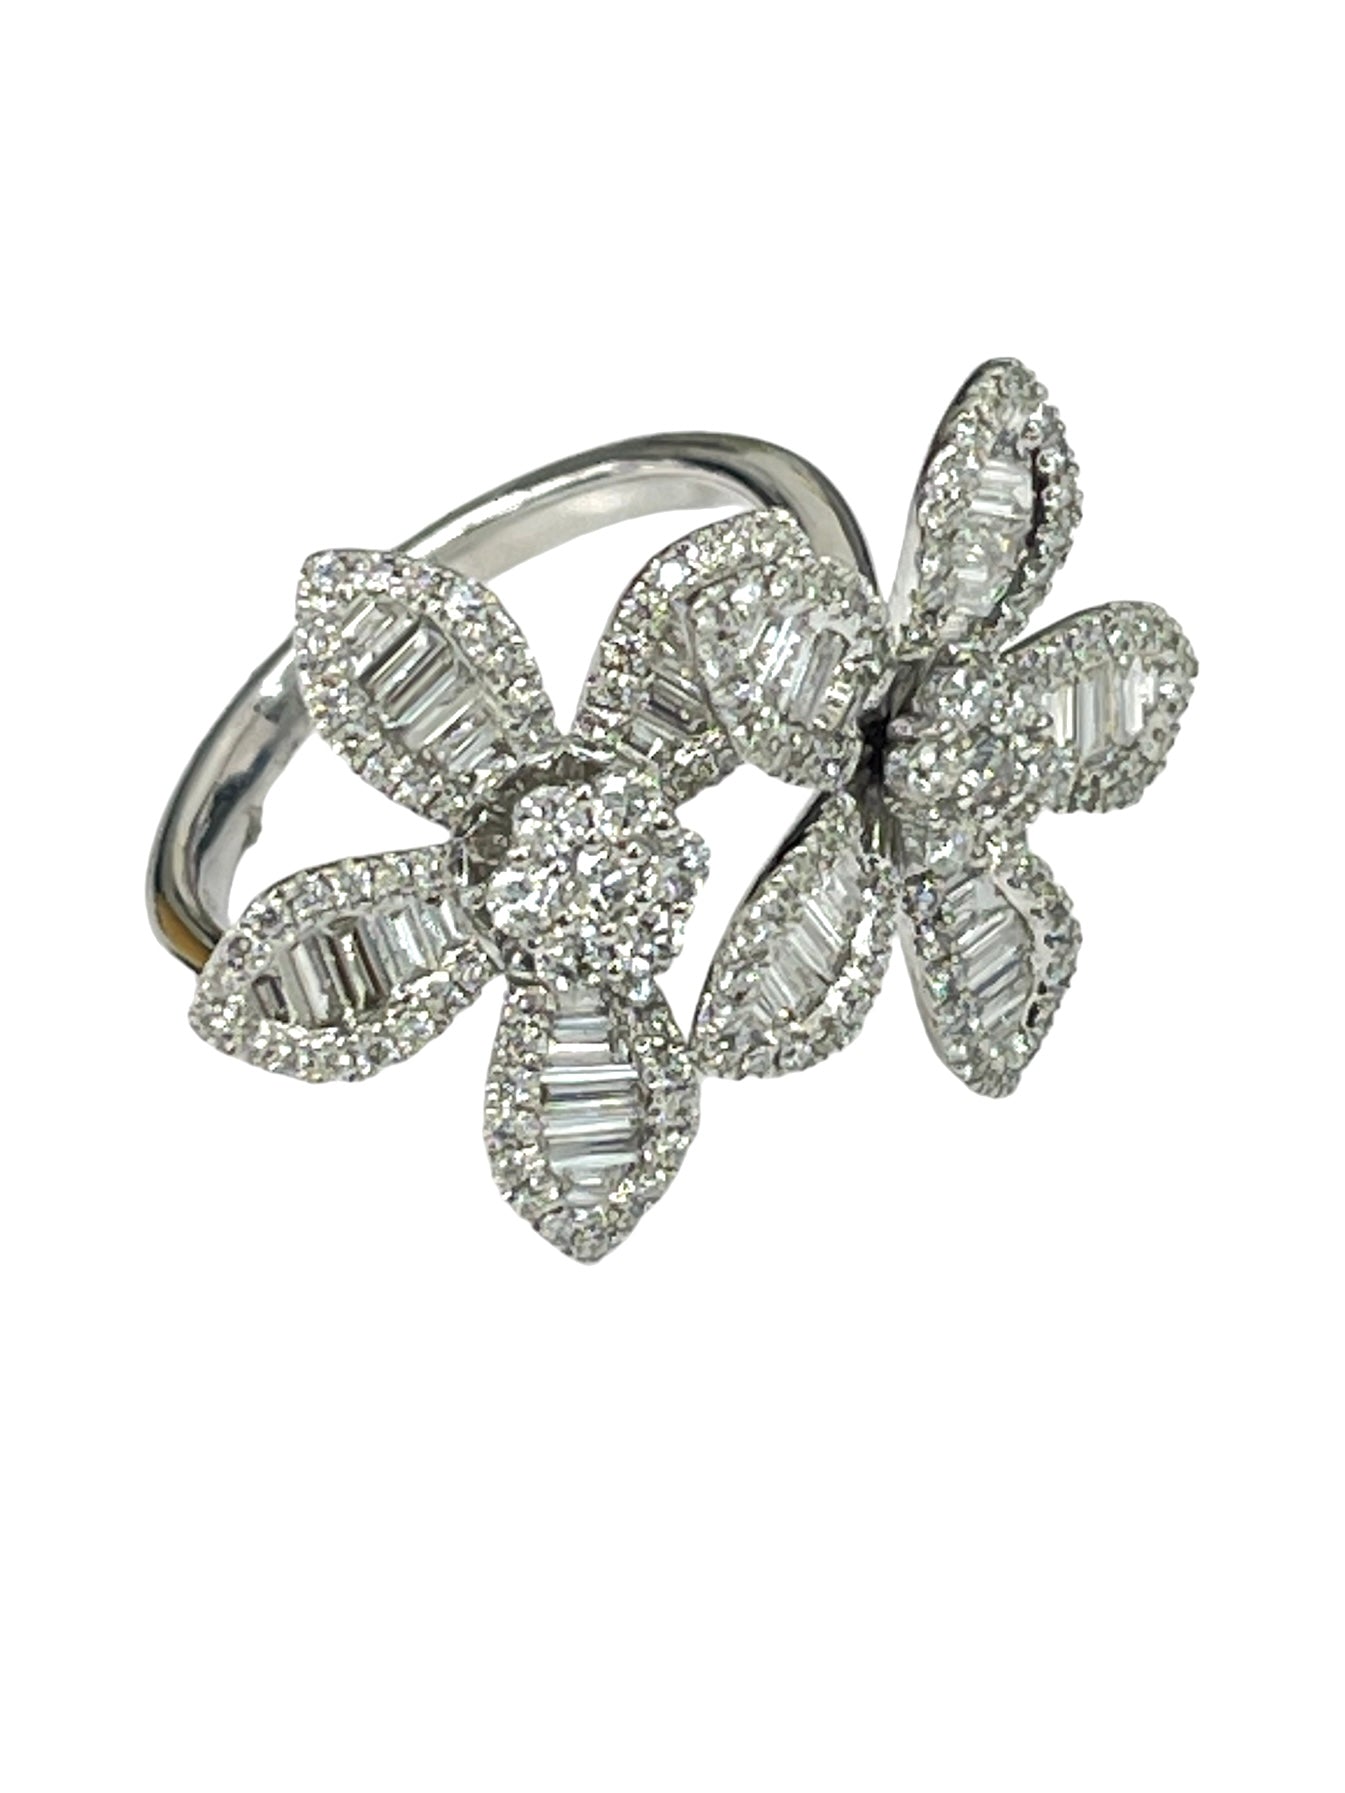 Double Flower Round and Baguettes Diamond Ring White Gold 18kt